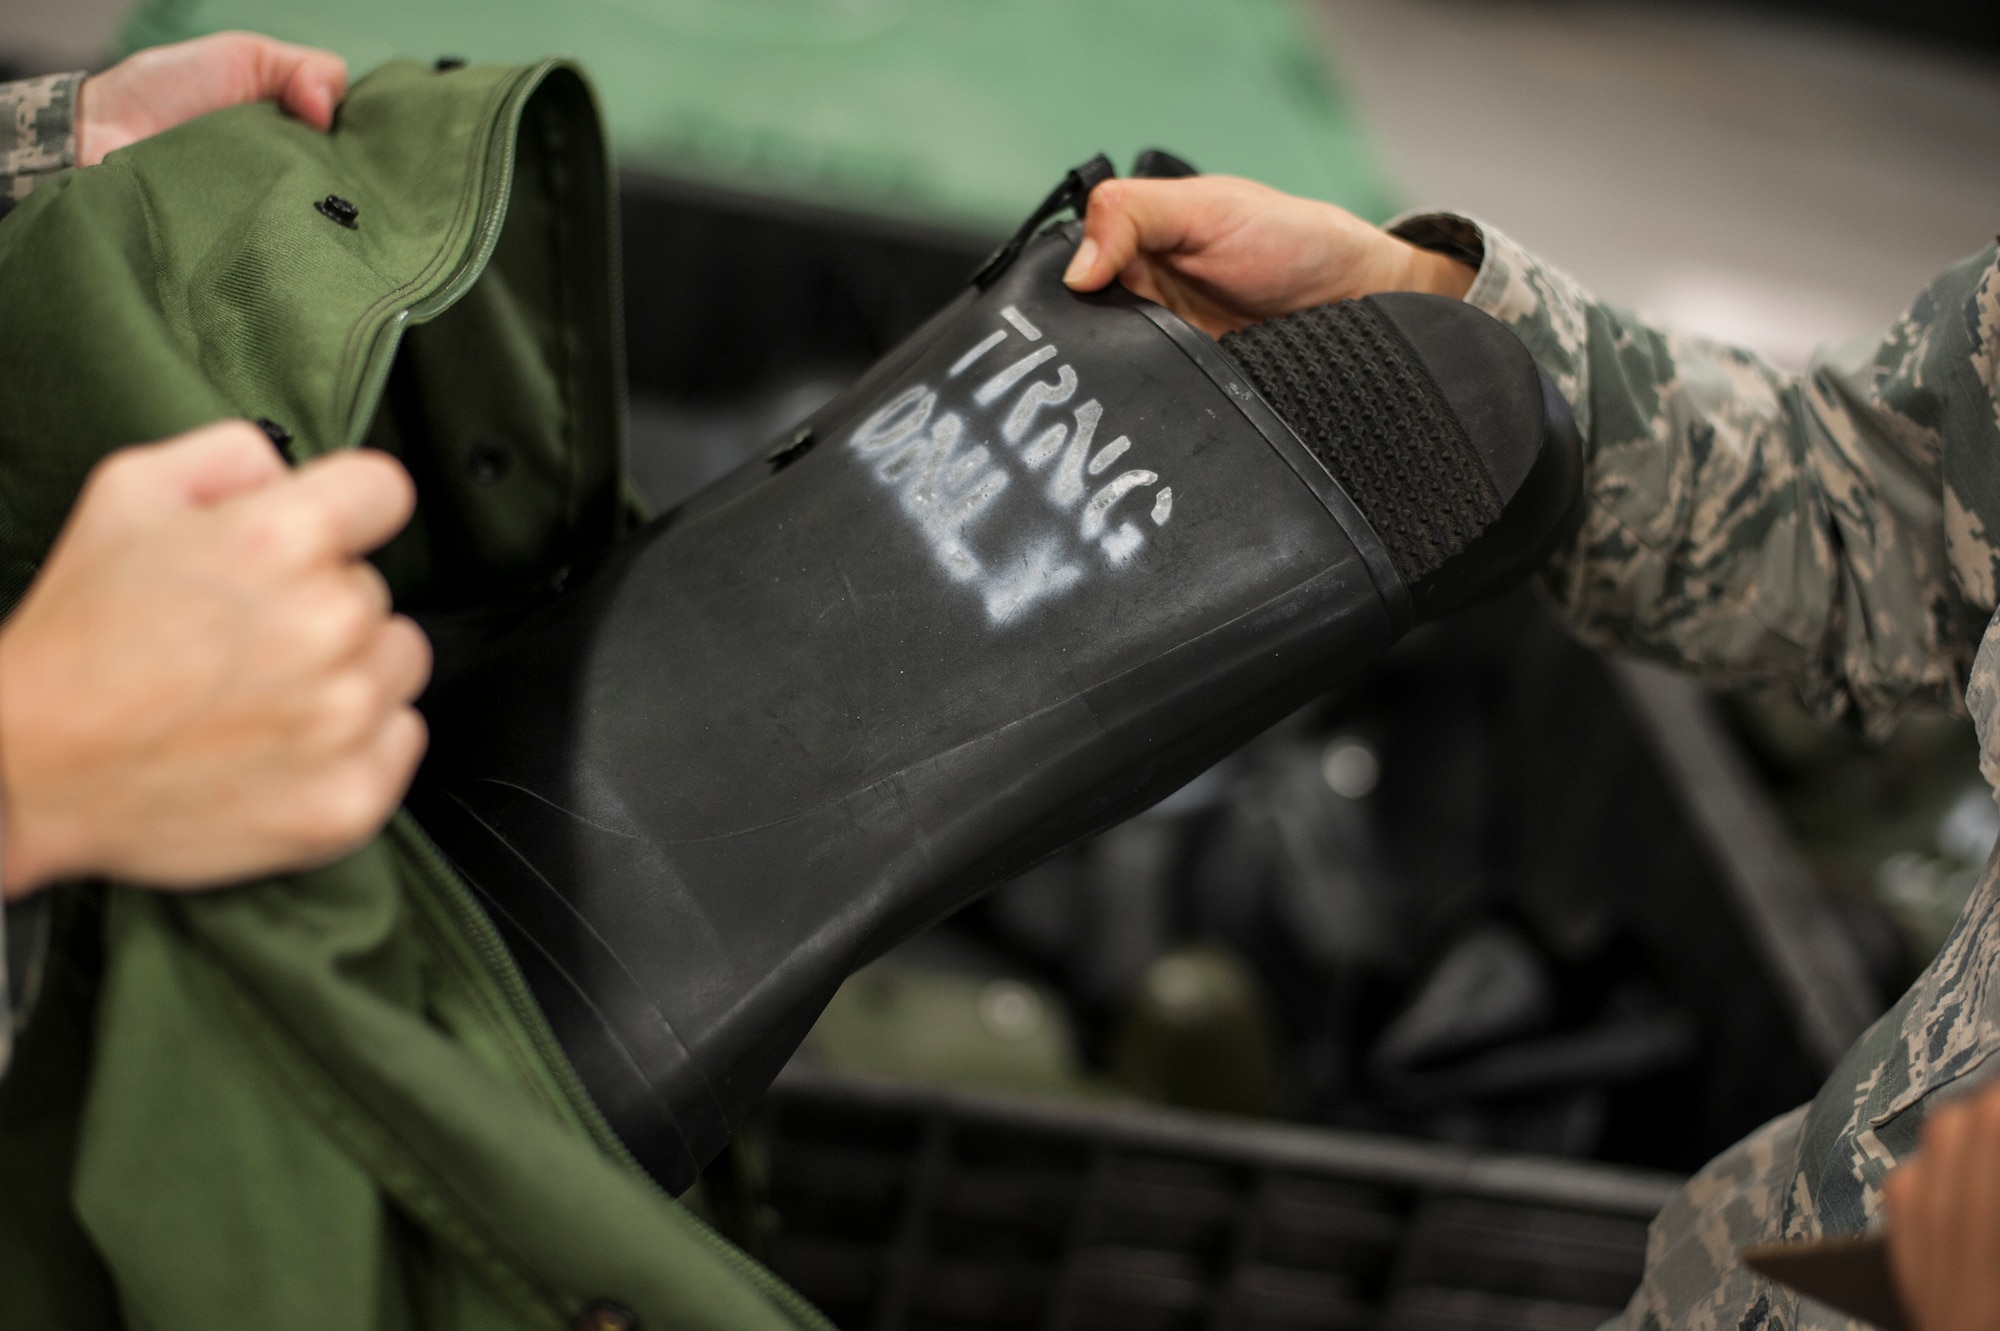 A rubber boot is placed into a duffel bag at MacDill Air Force Base, Fla., Dec. 28, 2017.